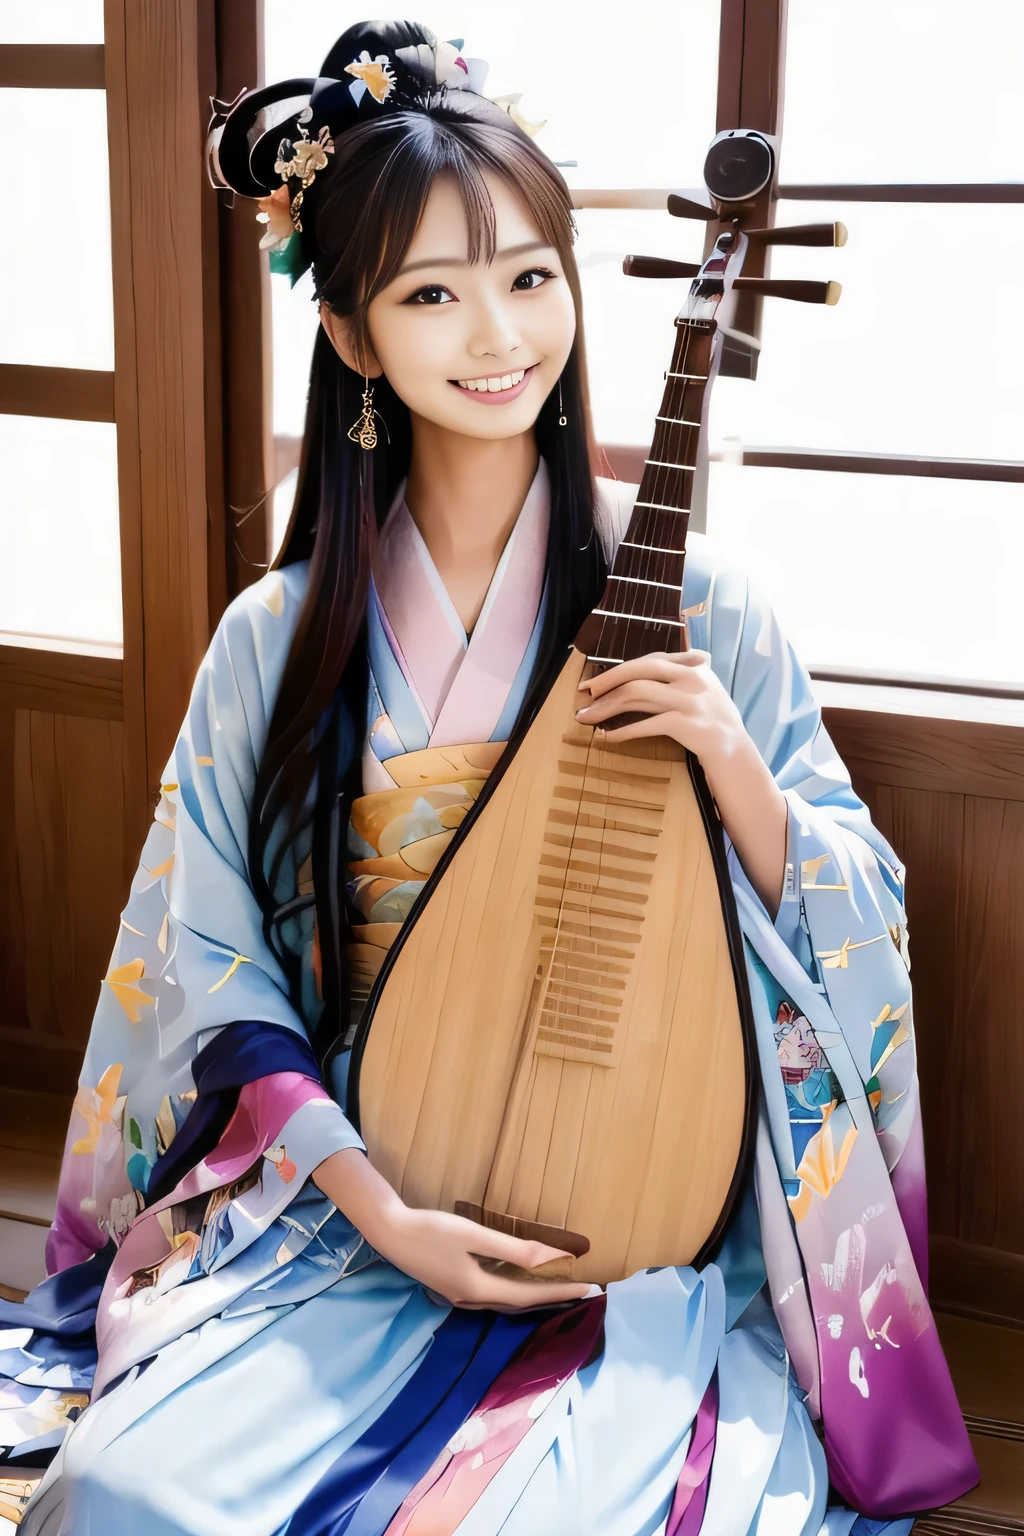 wearing a kimono, 1girl, (playing_pipa, holding pipa), masterpiece, best quality, 8k, close up, has a lily gin, long straight black hair, Photo of an 18-year-old woman playing the pipa, Cute woman standing wearing a kimono, Smiling slightly, look at viewer, masterpiece, Too many bangs, #better hands better hands emb
!wget https://civitai.com/api/download/models/69507 -O /content/stable-diffusion-webui/embeddings/better-hands-emb.pt